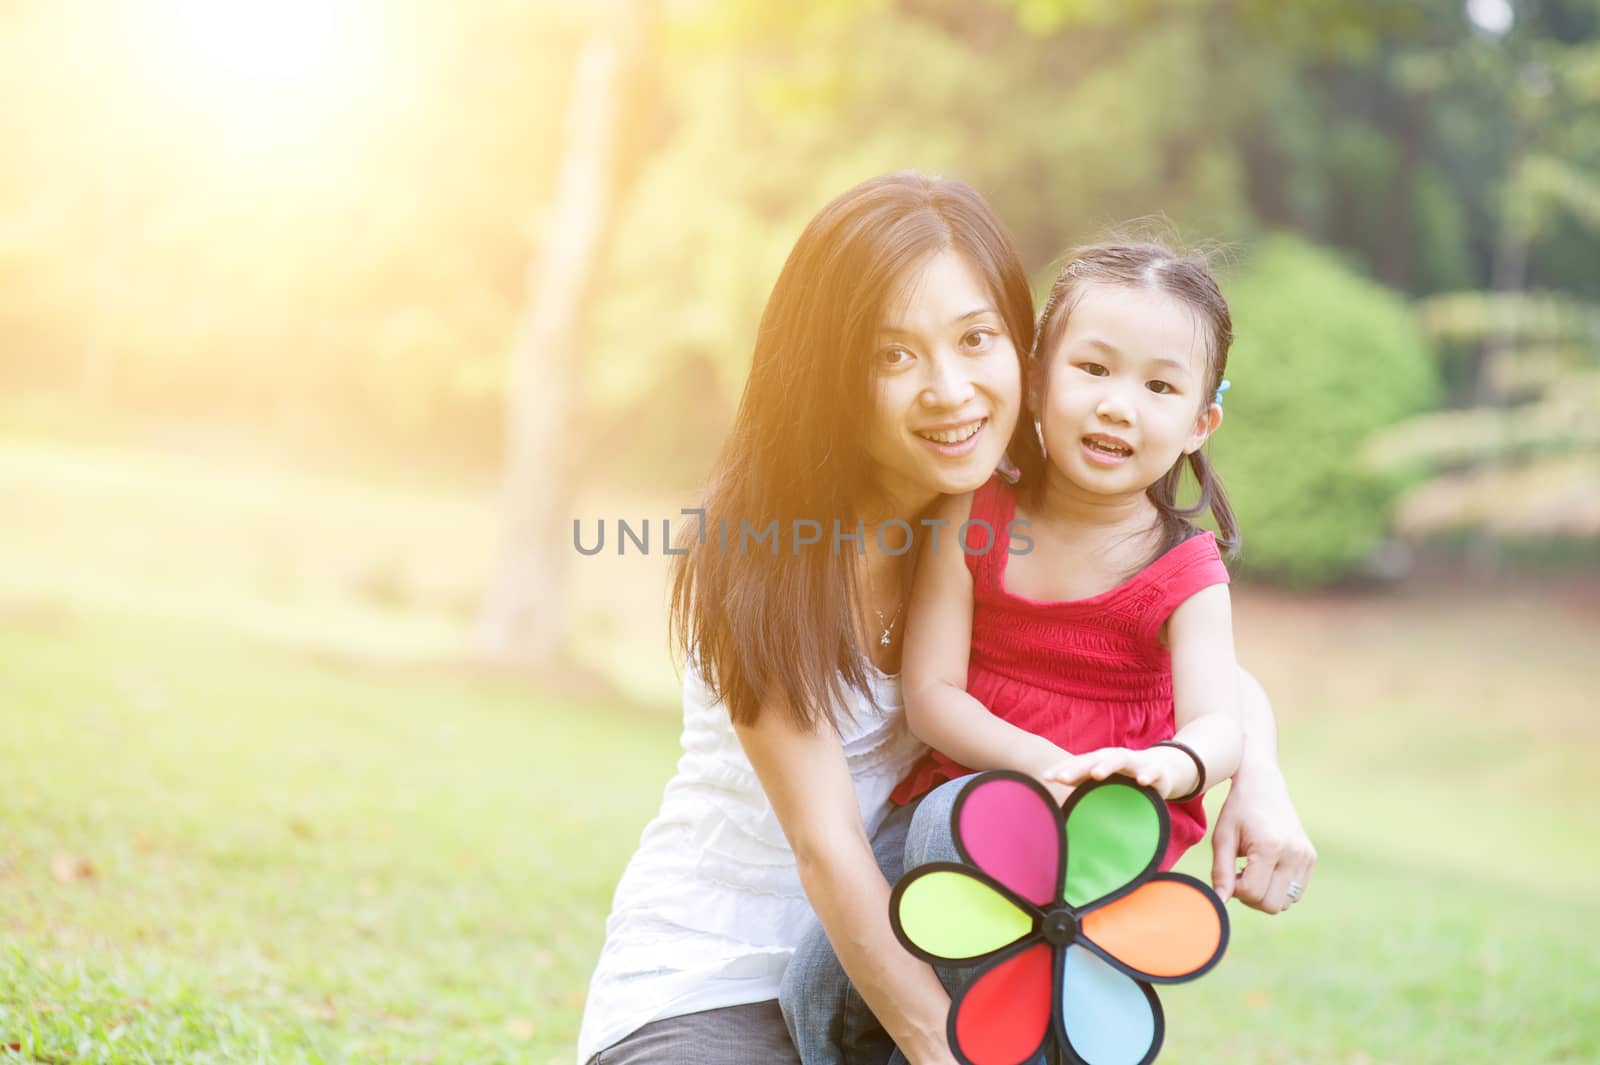 Happy mother and daughter laughing together outside, in the park. Family outdoor fun, morning with sun flare.